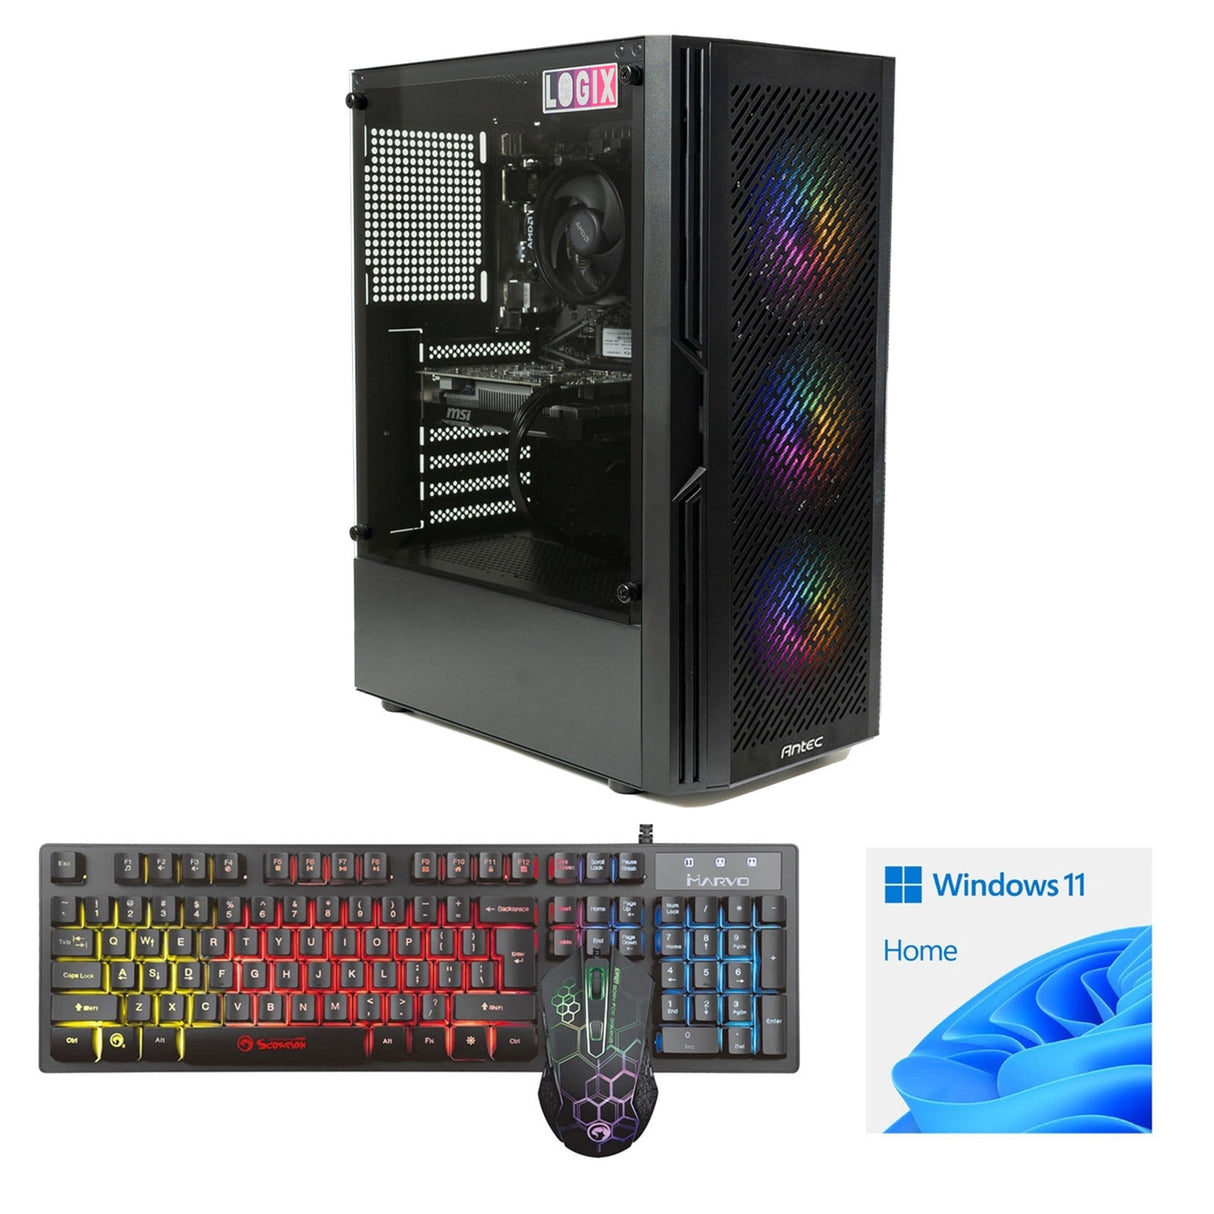 LOGIX AMD Ryzen 5 4500 6 Core 12 Threads, 3.60GHz (4.10GHz Boost), 16GB DDR4 RAM, 1TB NVMe M.2, 80 Cert PSU, GTX1650 4GB Graphics, Windows 11 home installed + FREE Keyboard & Mouse - Prebuilt System - Full 3-Year Parts & Collection Warranty